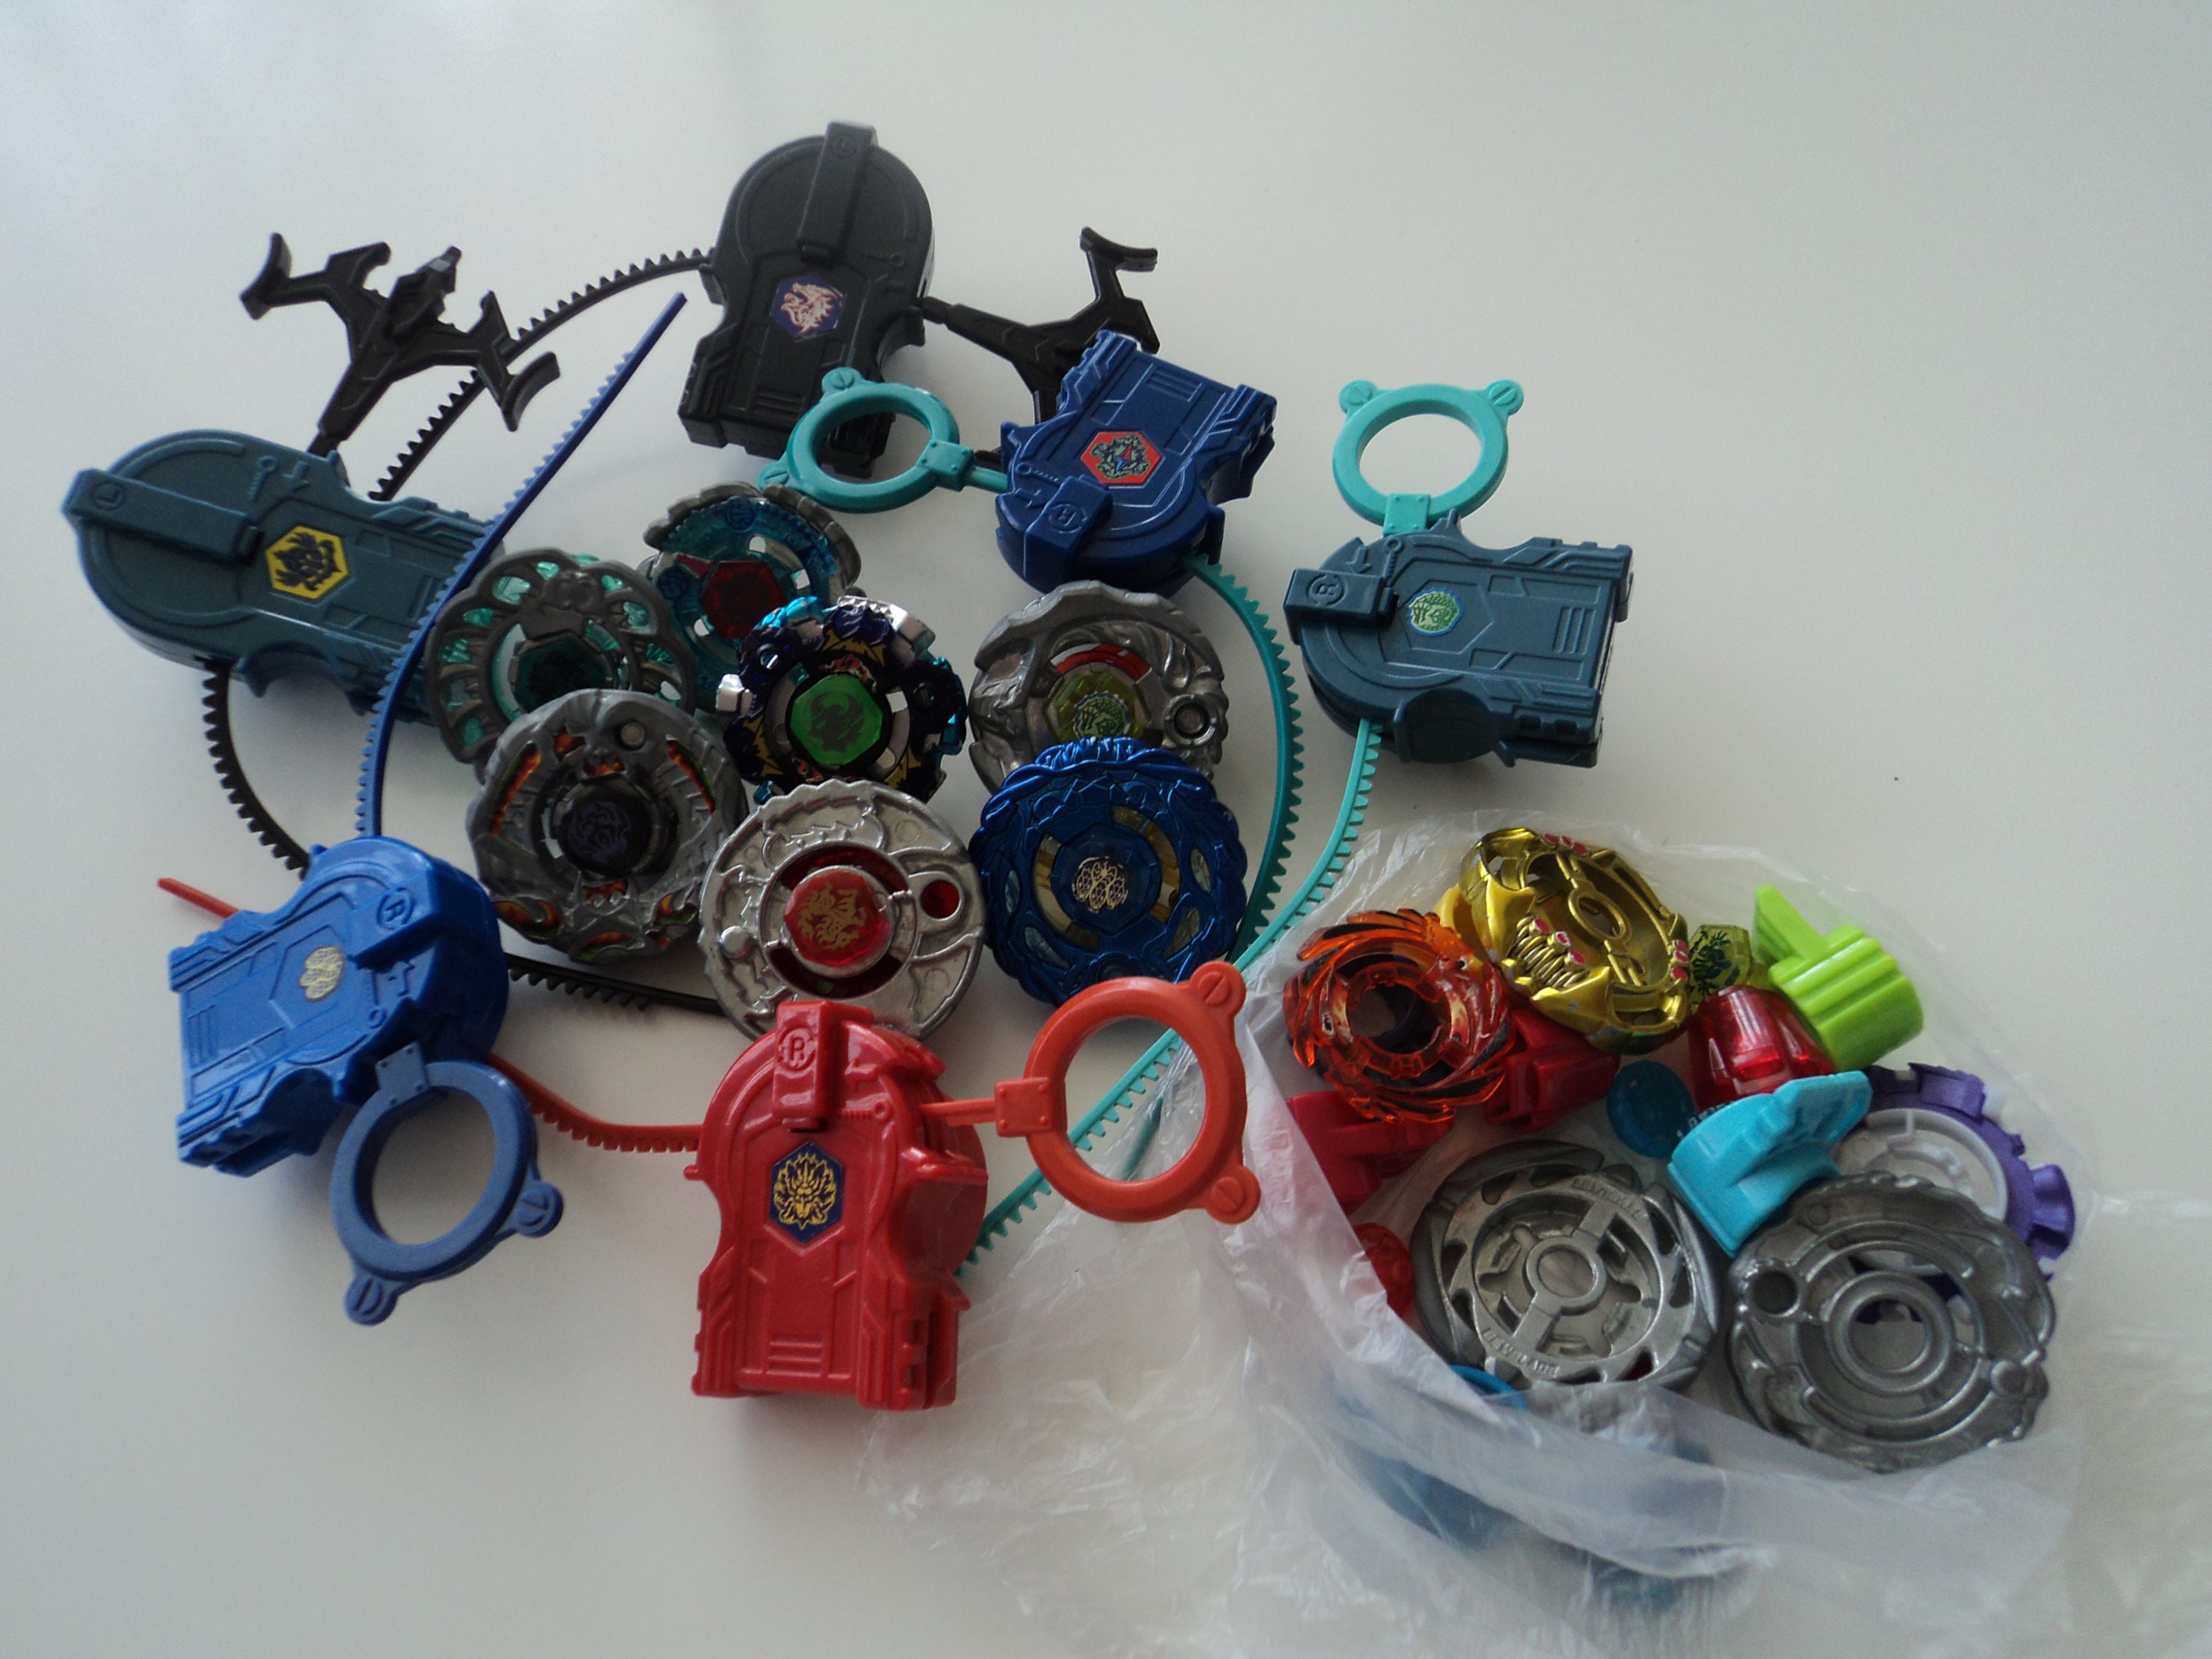 Vintage Beyblade Spinners Random Launcher and Ripcord 